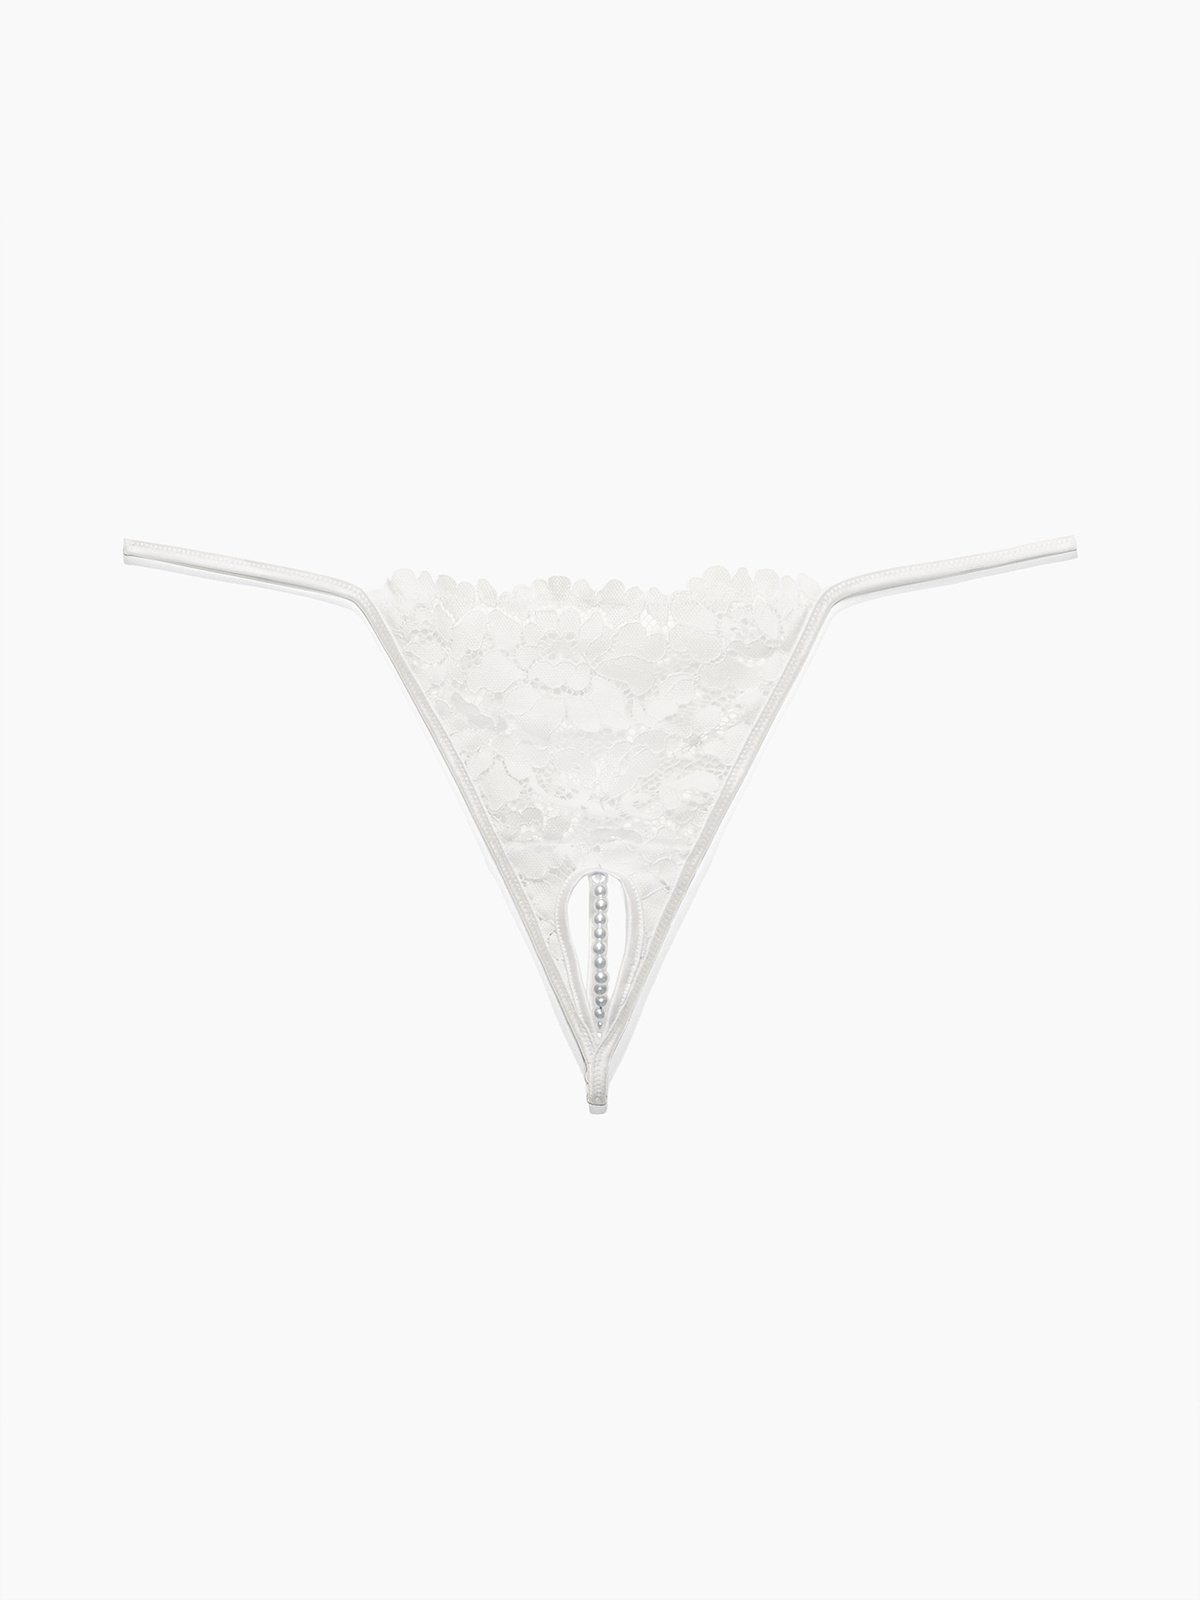 Crotchless Bridal Thong in White